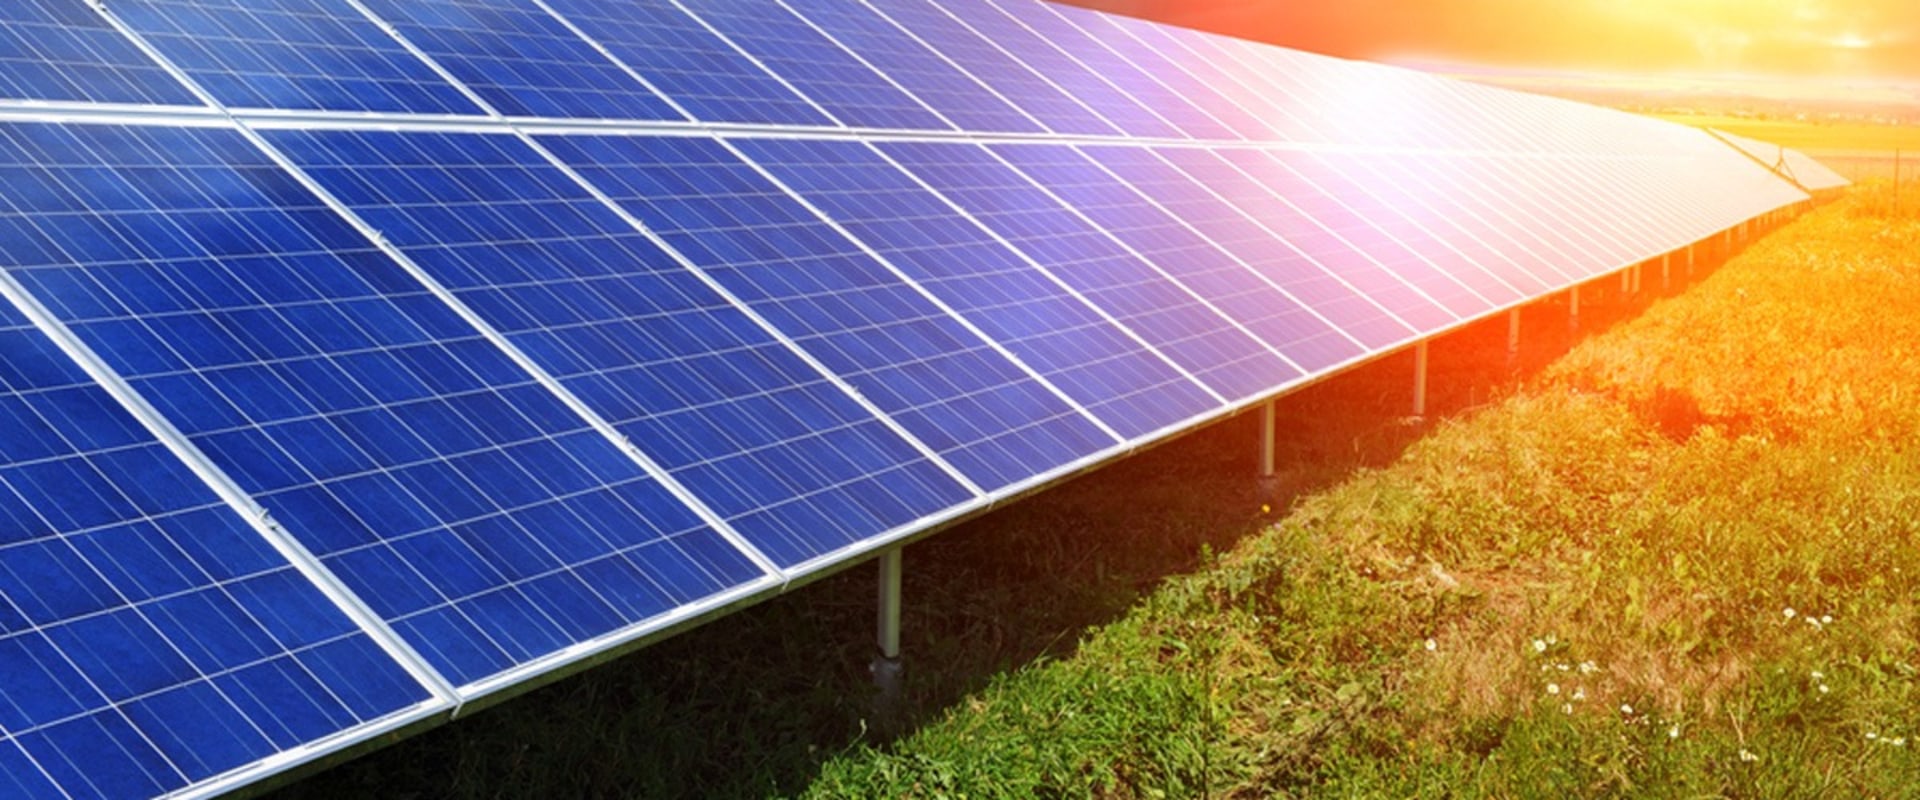 Why solar energy is the best source of energy?